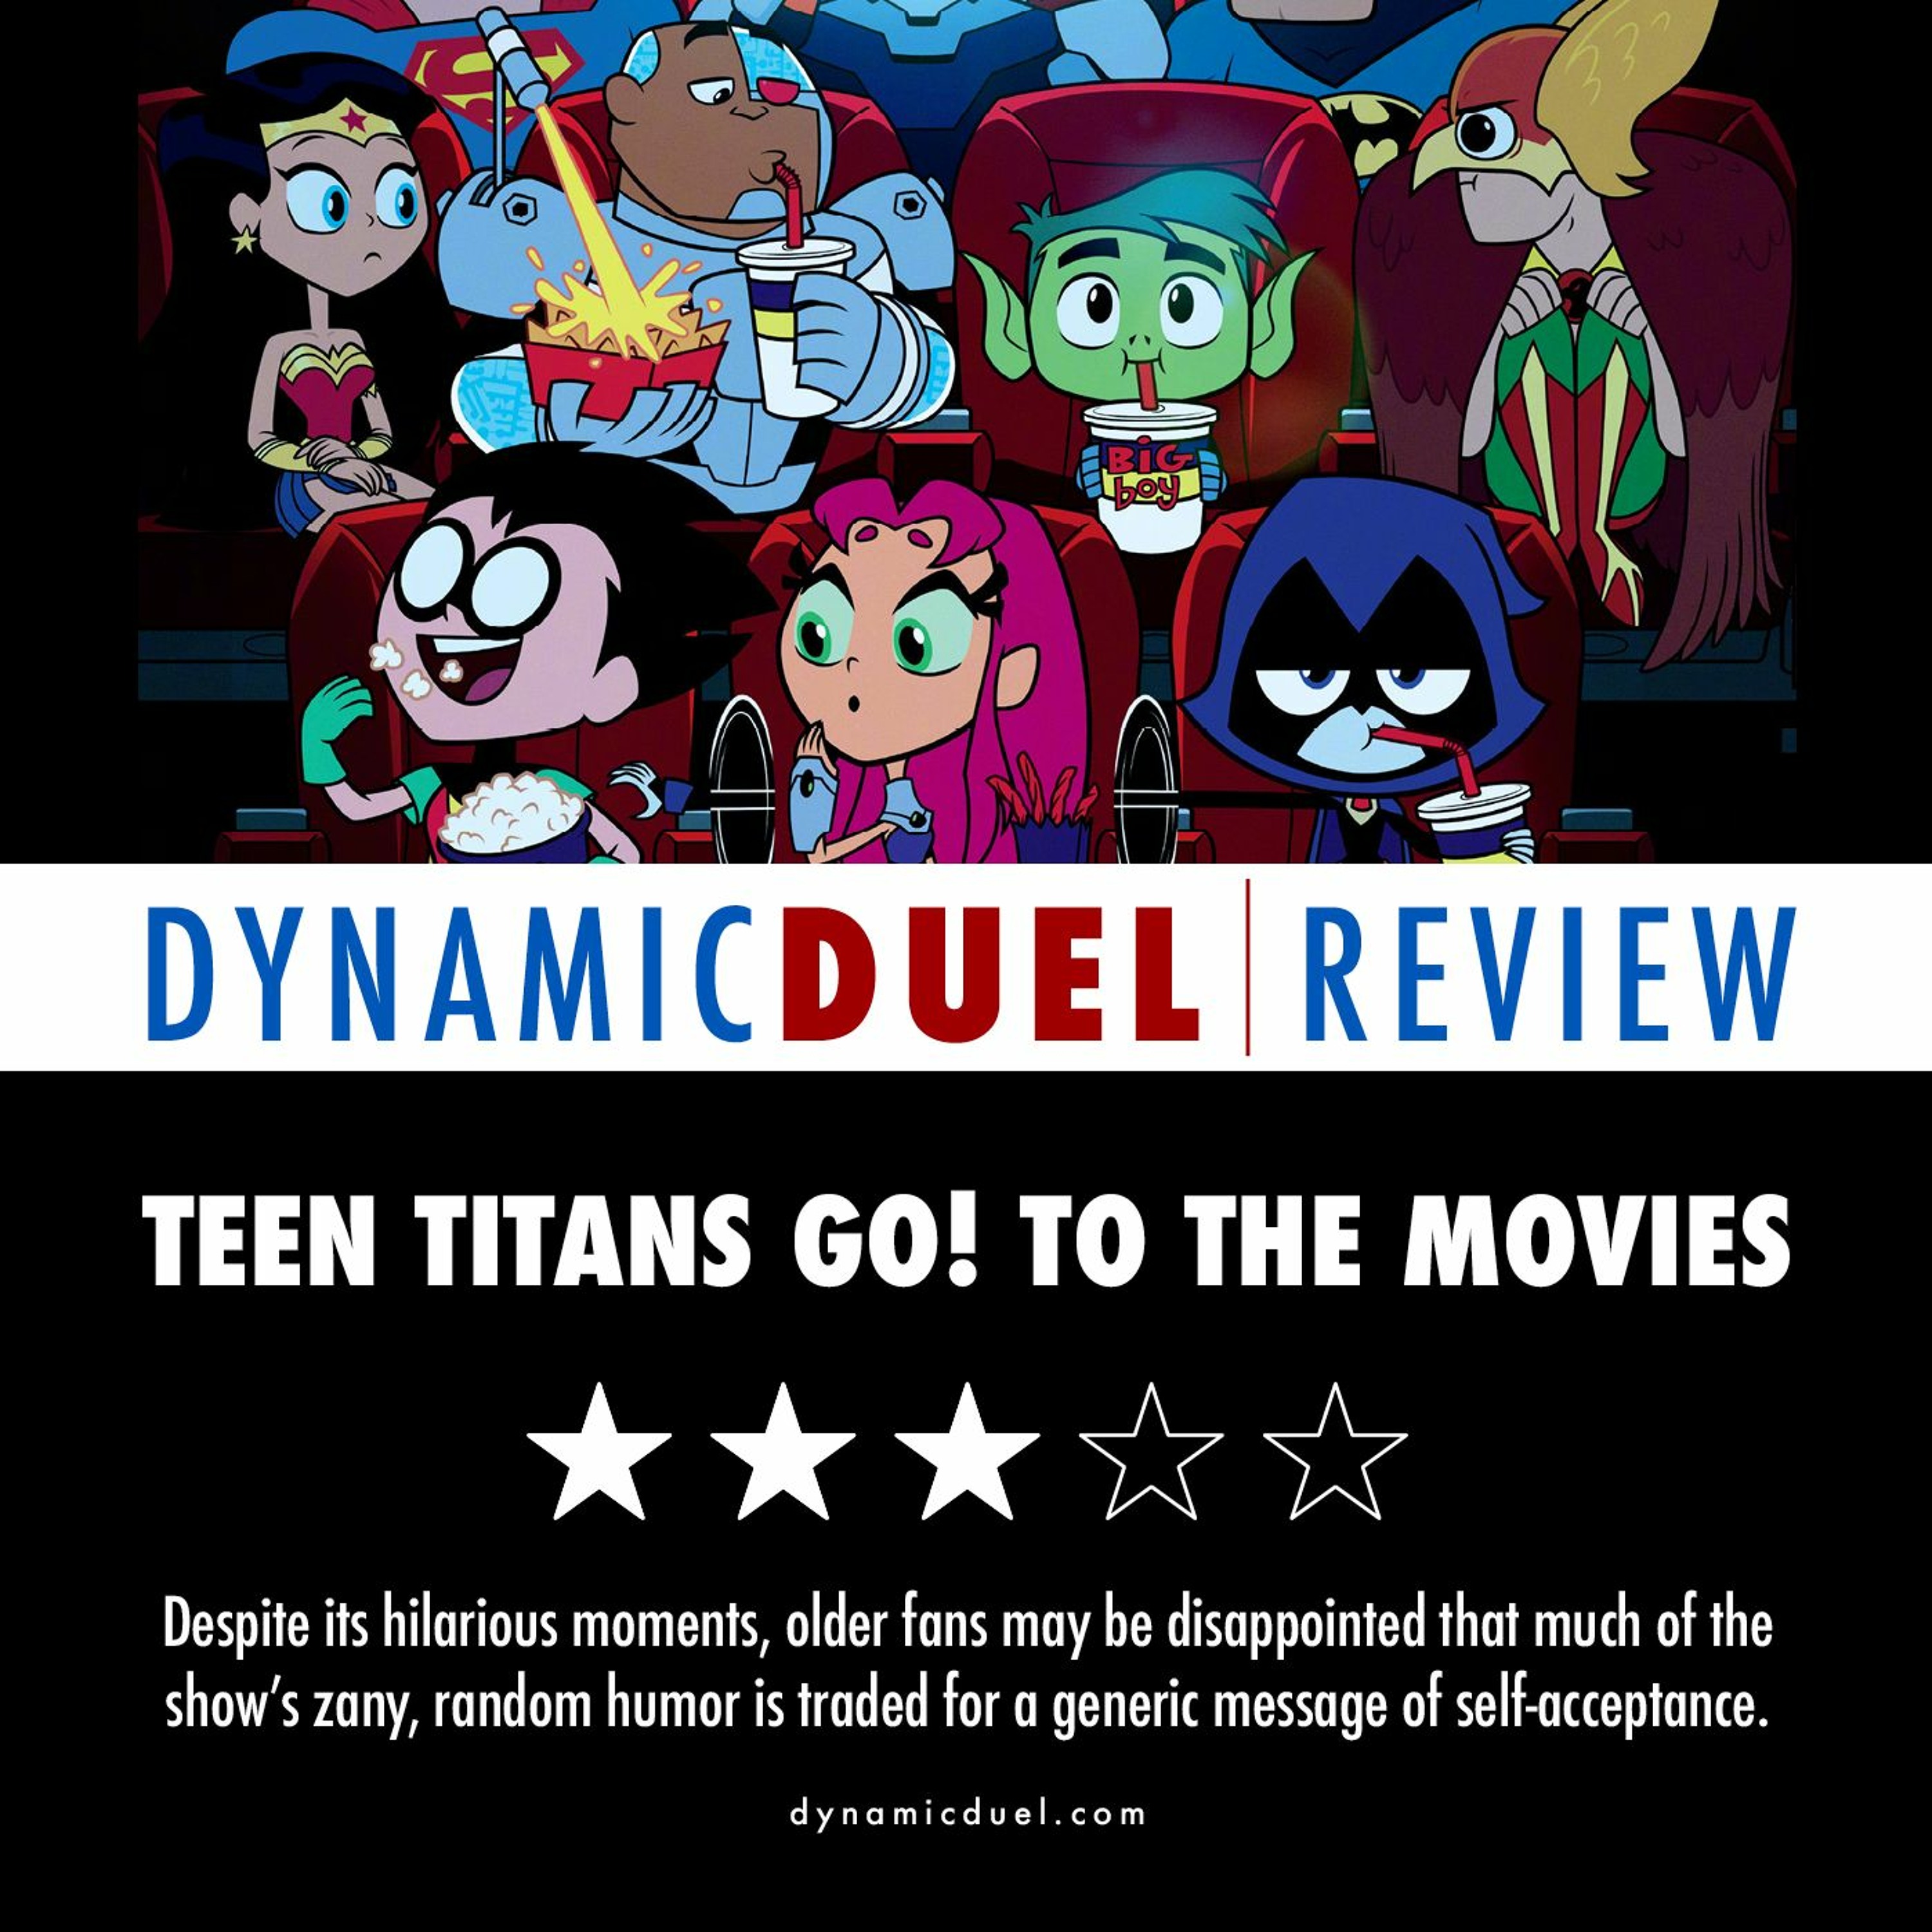 Teen Titans Go! To the Movies Review Image